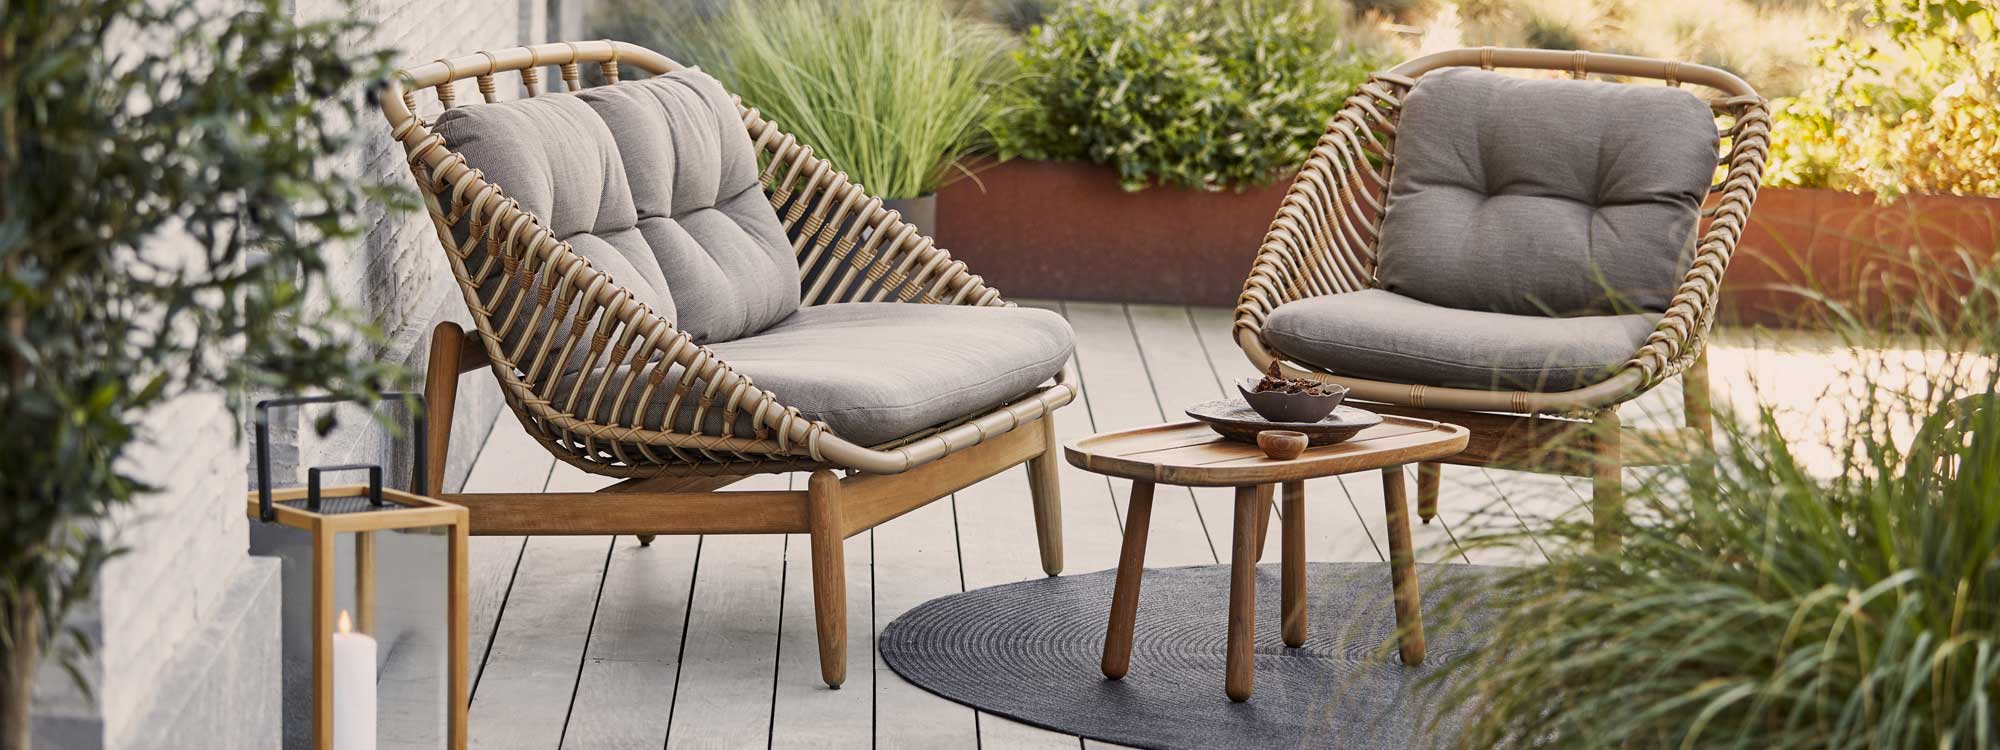 Image of Cane-line Strington 2 seat sofa and garden lounge chair, shown in Cane-line weave, which looks like natural cane.